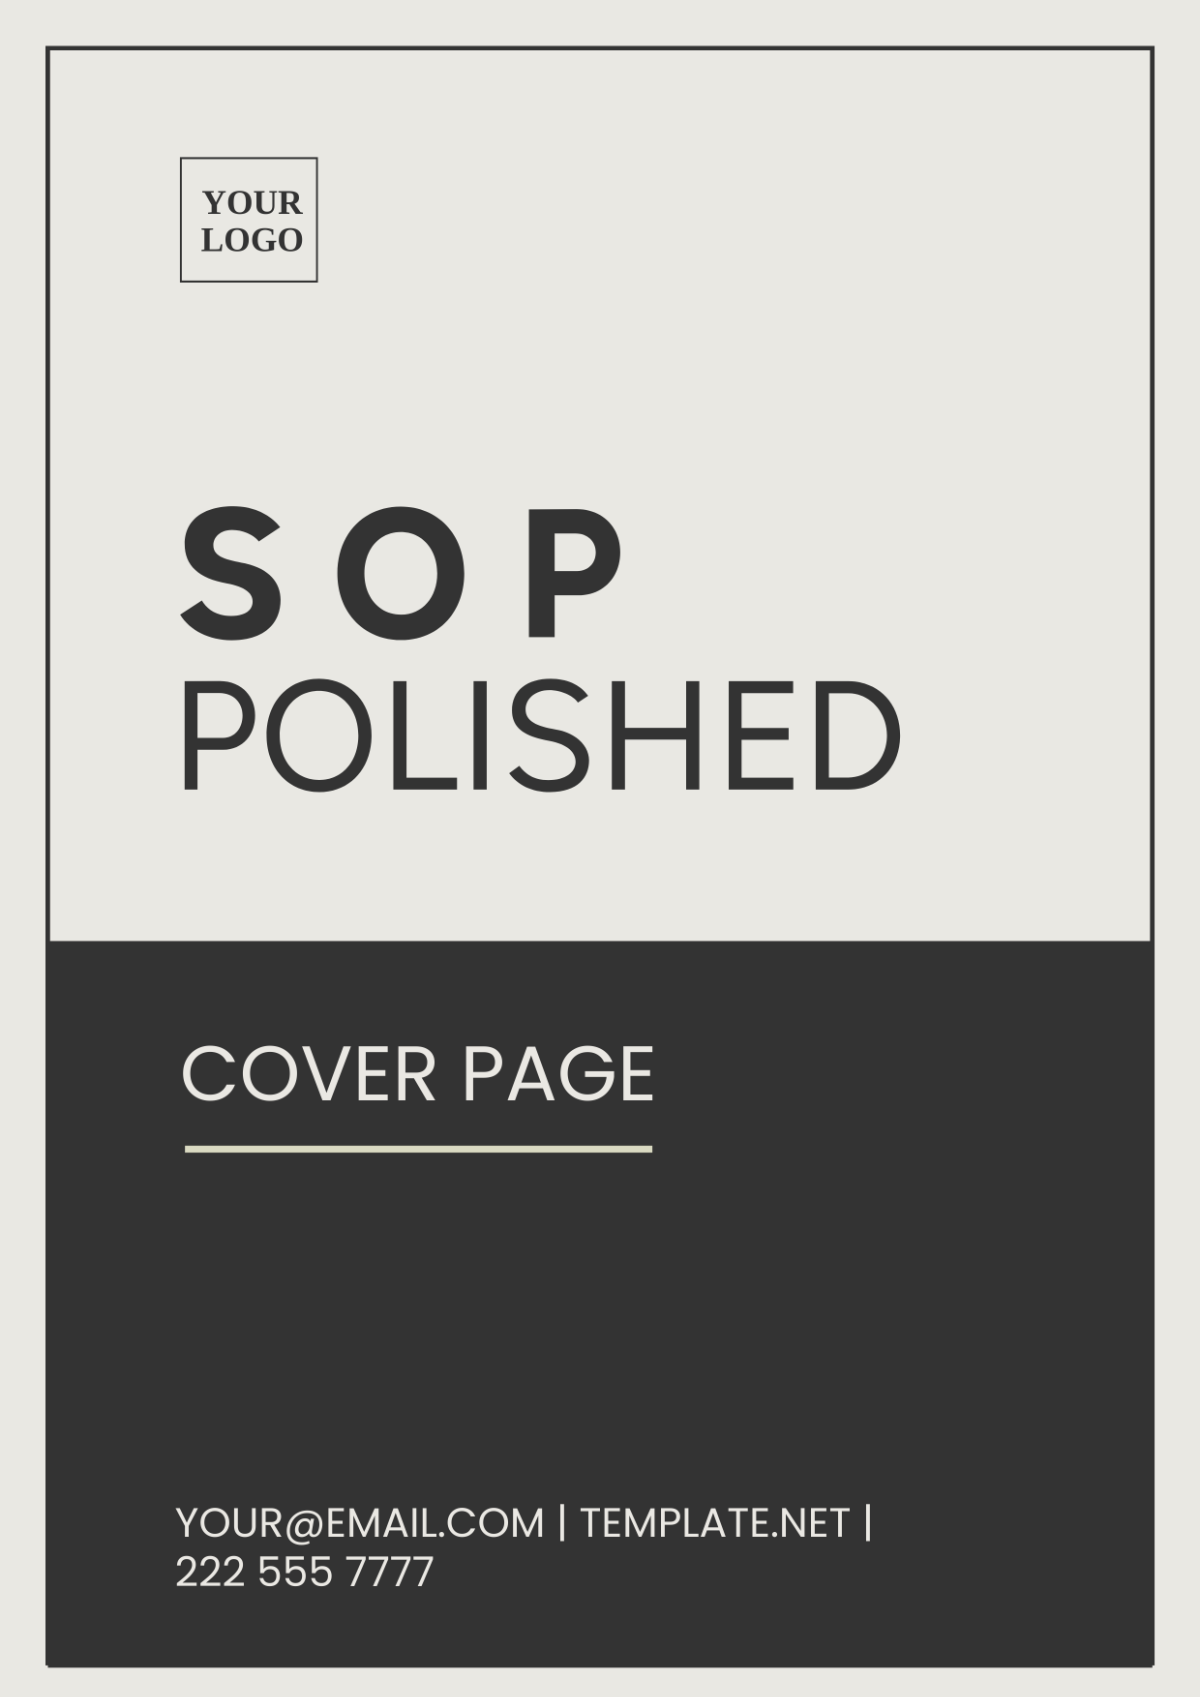 SOP Polished Cover Page Template